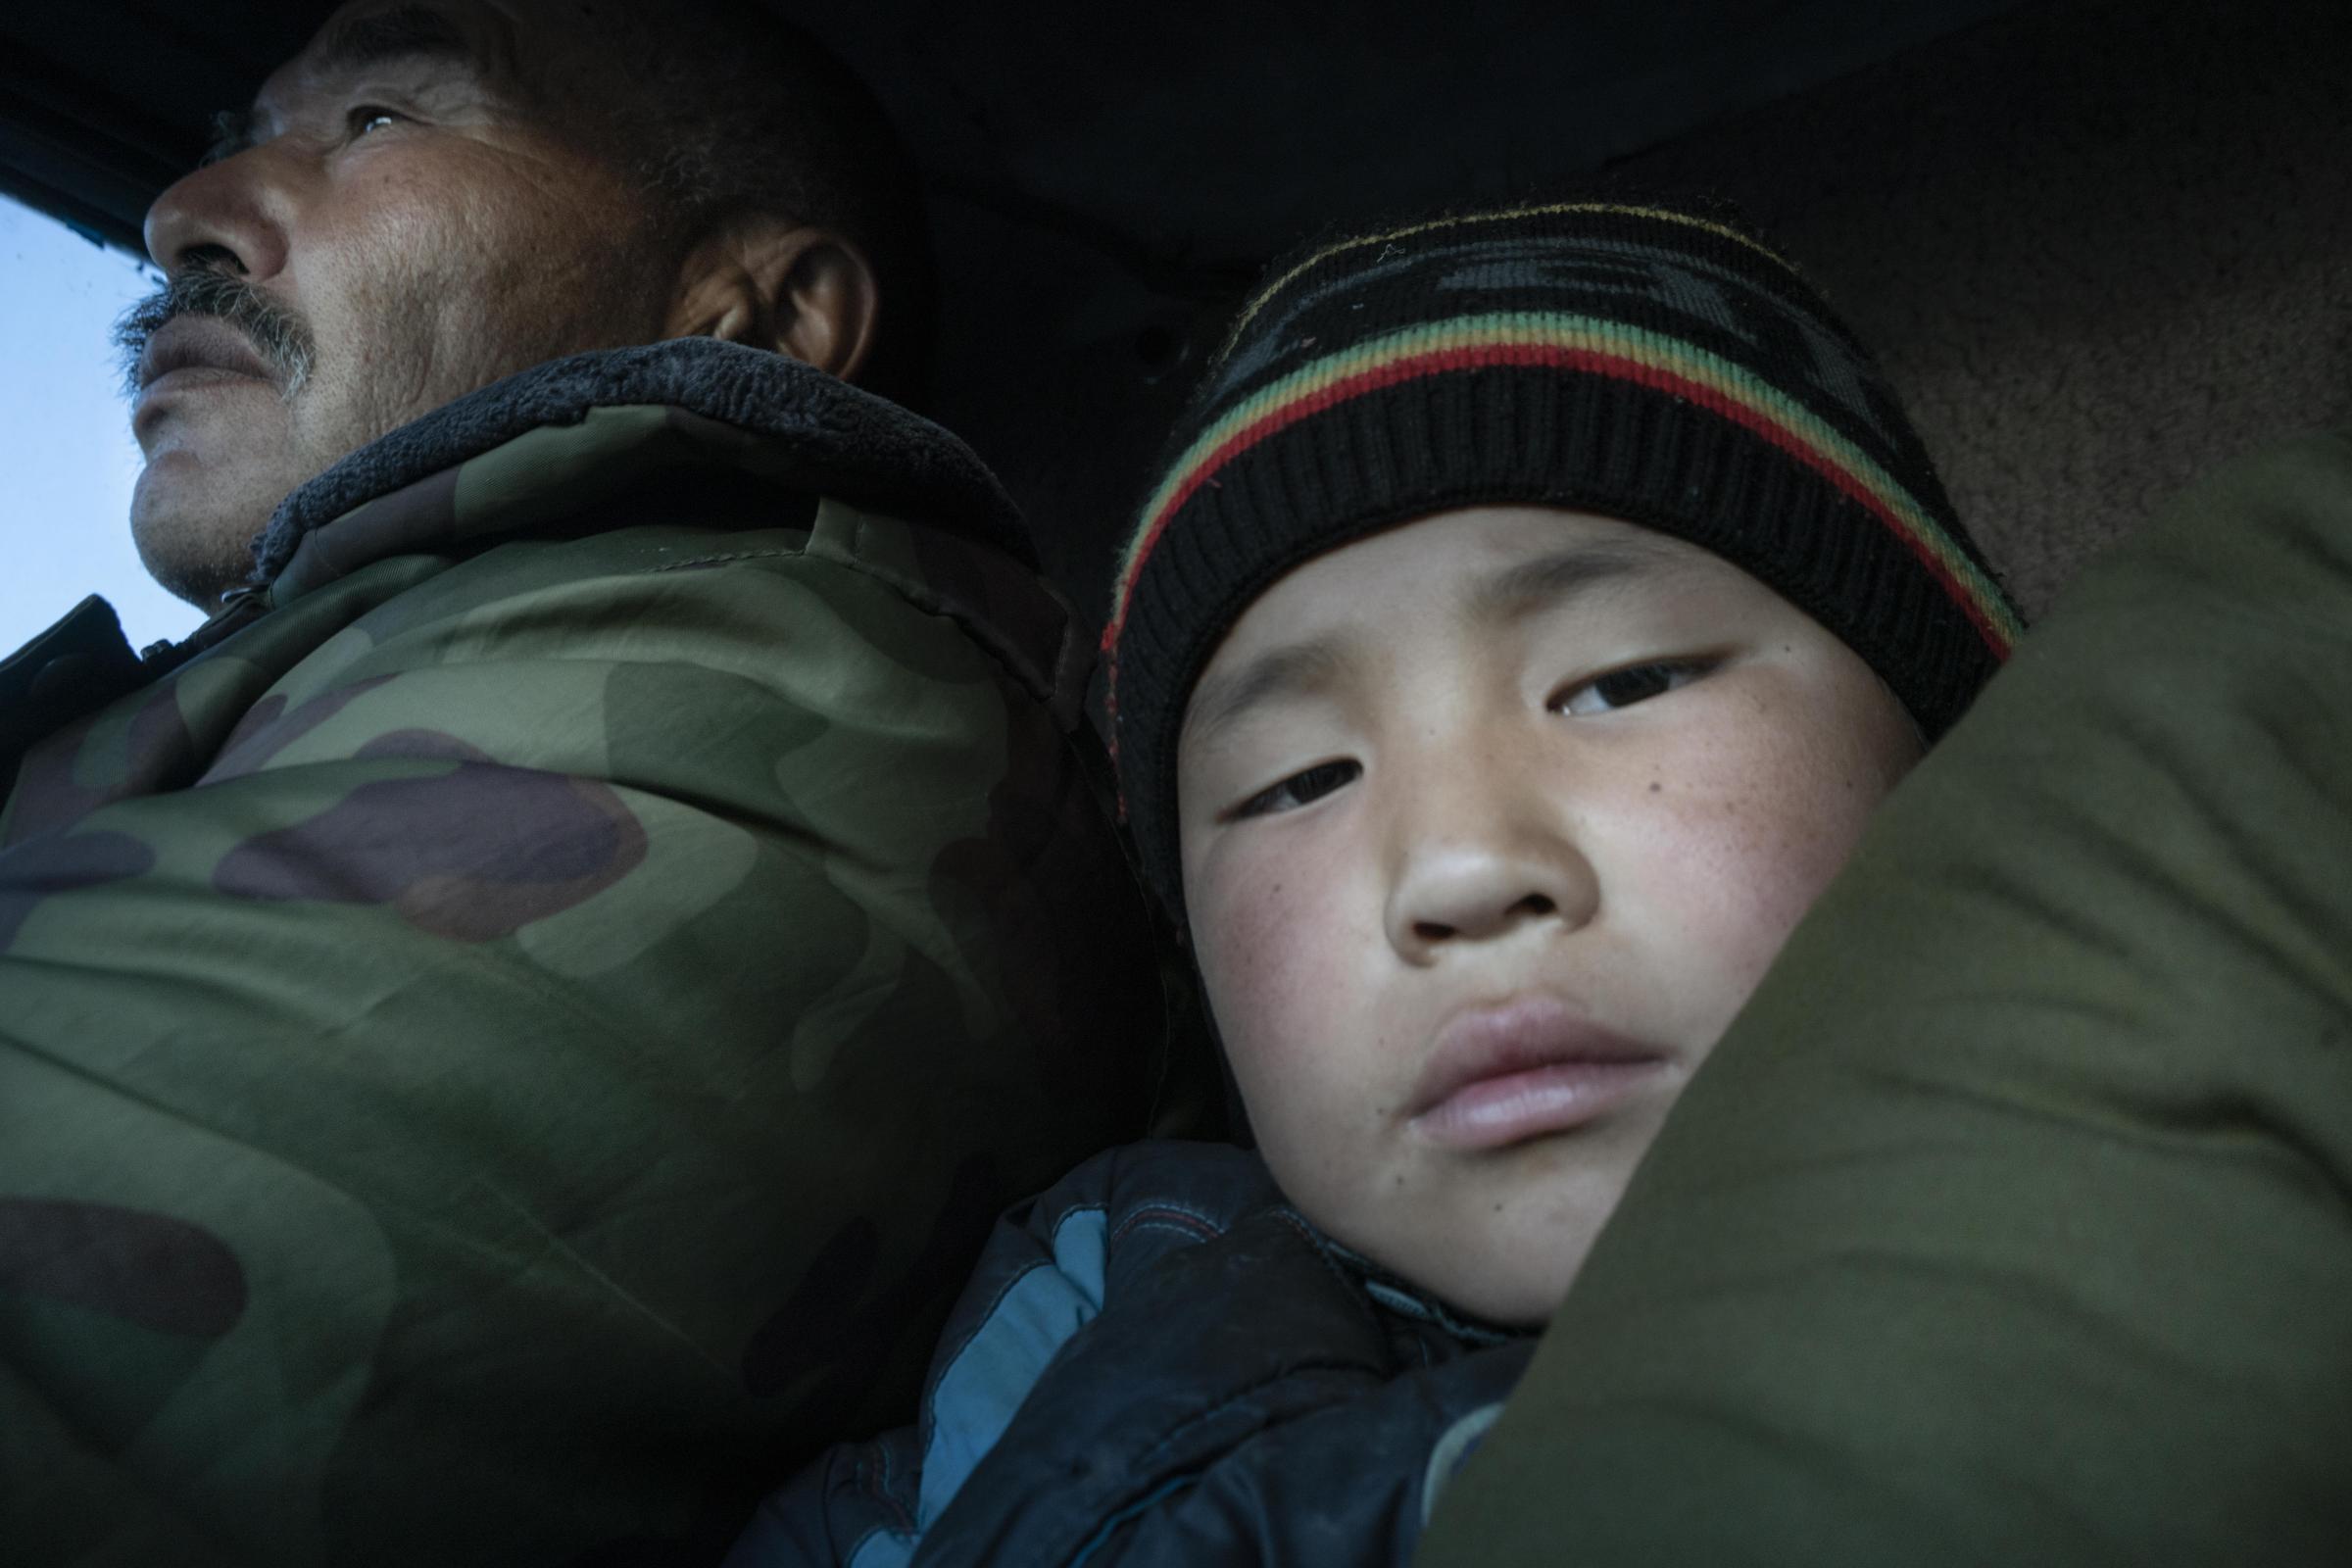 Nomads - Arsanaliev Zamir (65) and his grandson Tarstan (10) riding to the first yurt camp in a rented...